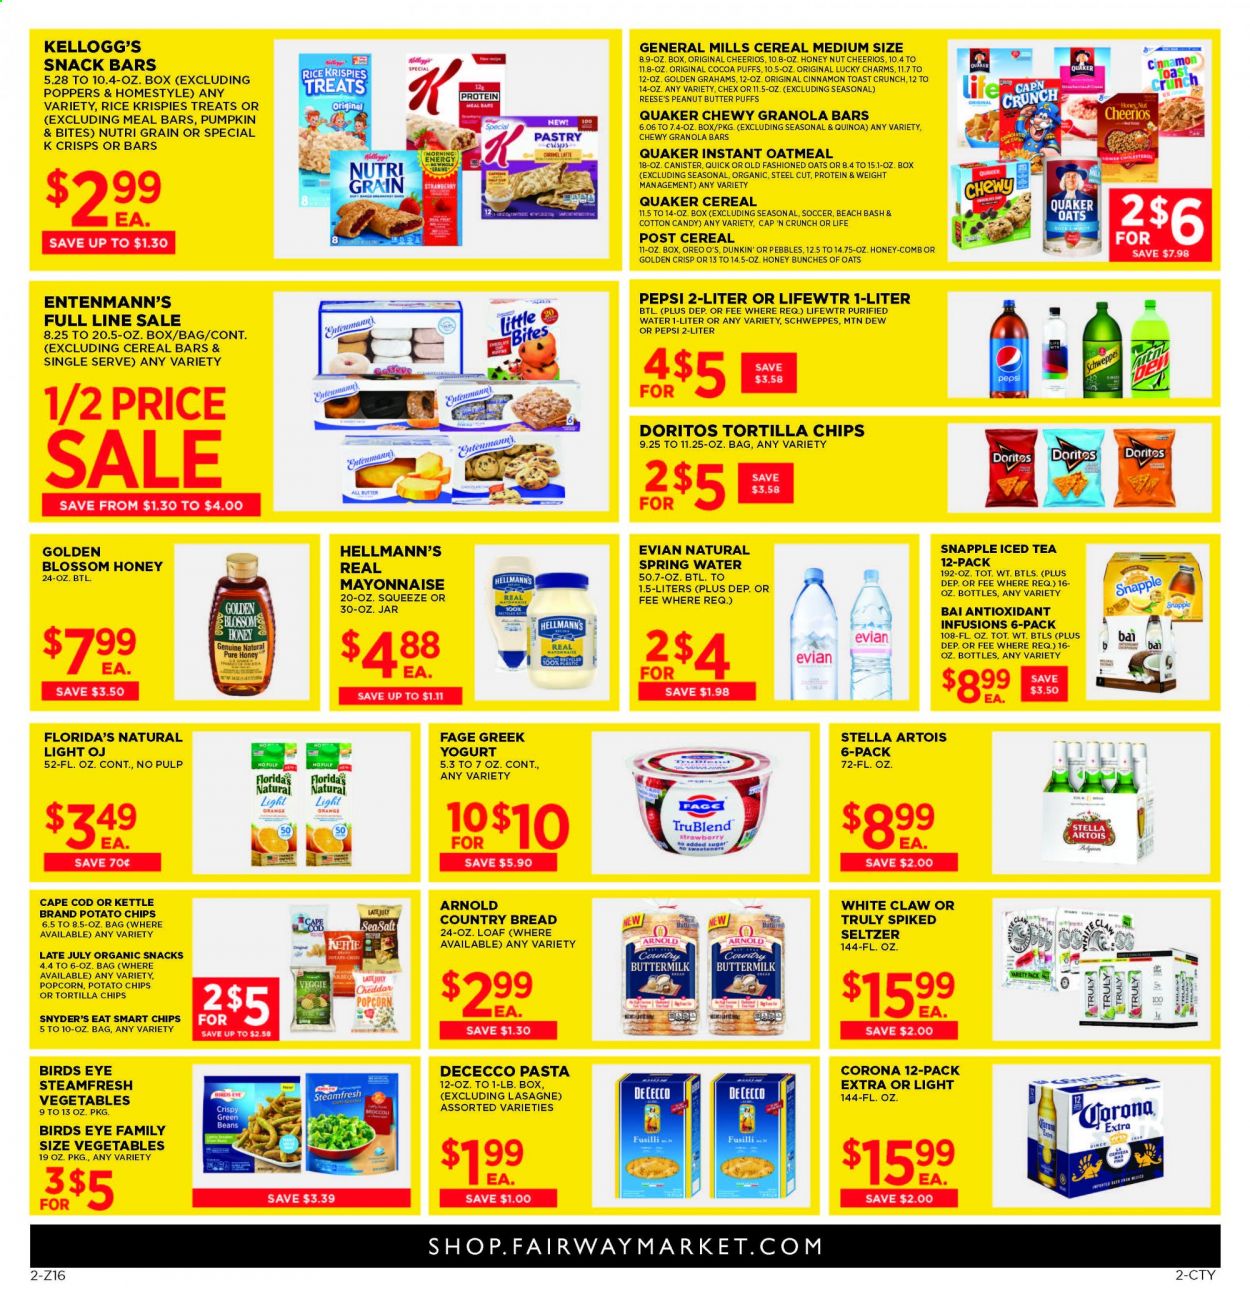 thumbnail - Fairway Market Flyer - 01/22/2021 - 01/28/2021 - Sales products - Stella Artois, green beans, bread, toast bread, puffs, Entenmann's, Little Bites, oranges, cod, Bird's Eye, Quaker, cheddar, Oreo, yoghurt, buttermilk, Blossom, mayonnaise, Hellmann’s, Reese's, beans, cereal bar, cotton candy, Kellogg's, snack bar, Florida's Natural, Doritos, tortilla chips, potato chips, chips, snack, popcorn, cocoa, oatmeal, cereals, Cheerios, granola bar, Rice Krispies, Nutri-Grain, lasagne sheets, quinoa, pasta, cinnamon, peanut butter, Mountain Dew, Schweppes, Pepsi, Snapple, Bai, seltzer water, spring water, purified water, Lifewtr, White Claw, TRULY, beer, Corona Extra. Page 2.